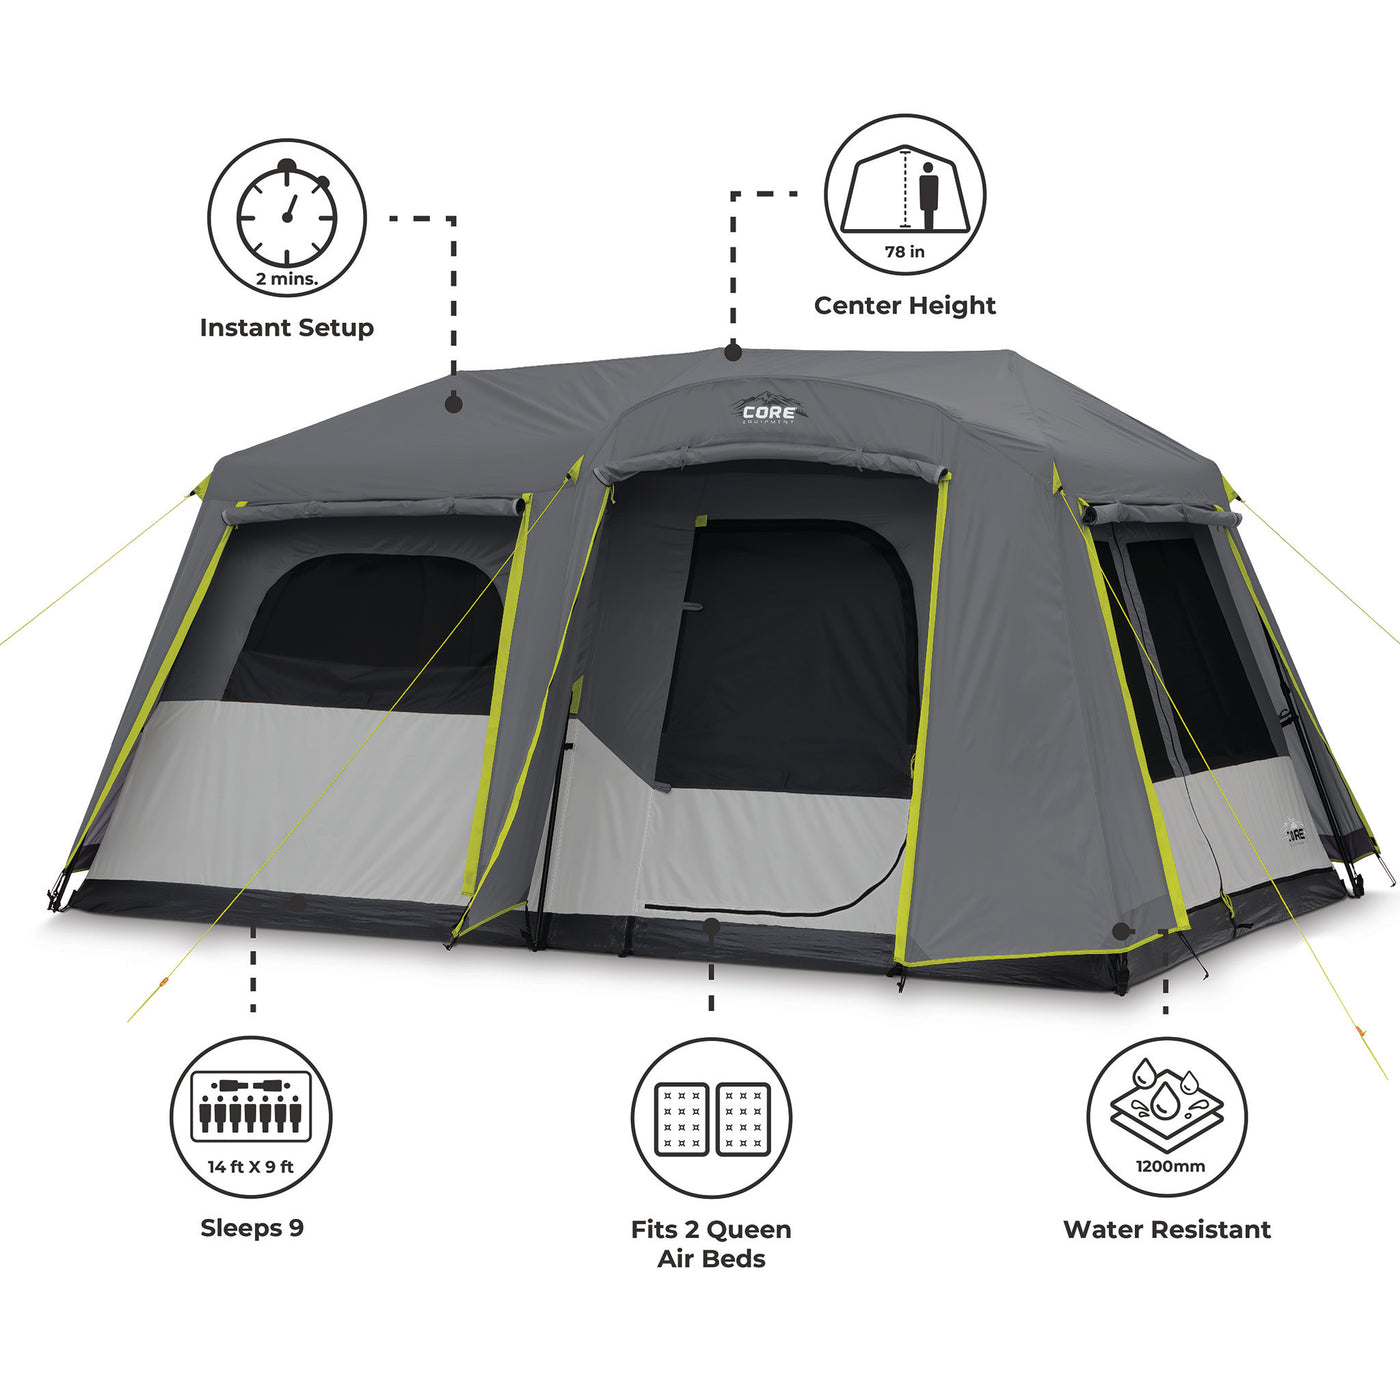 CORE 6 Person Instant Cabin Tent with Full Rainfly 